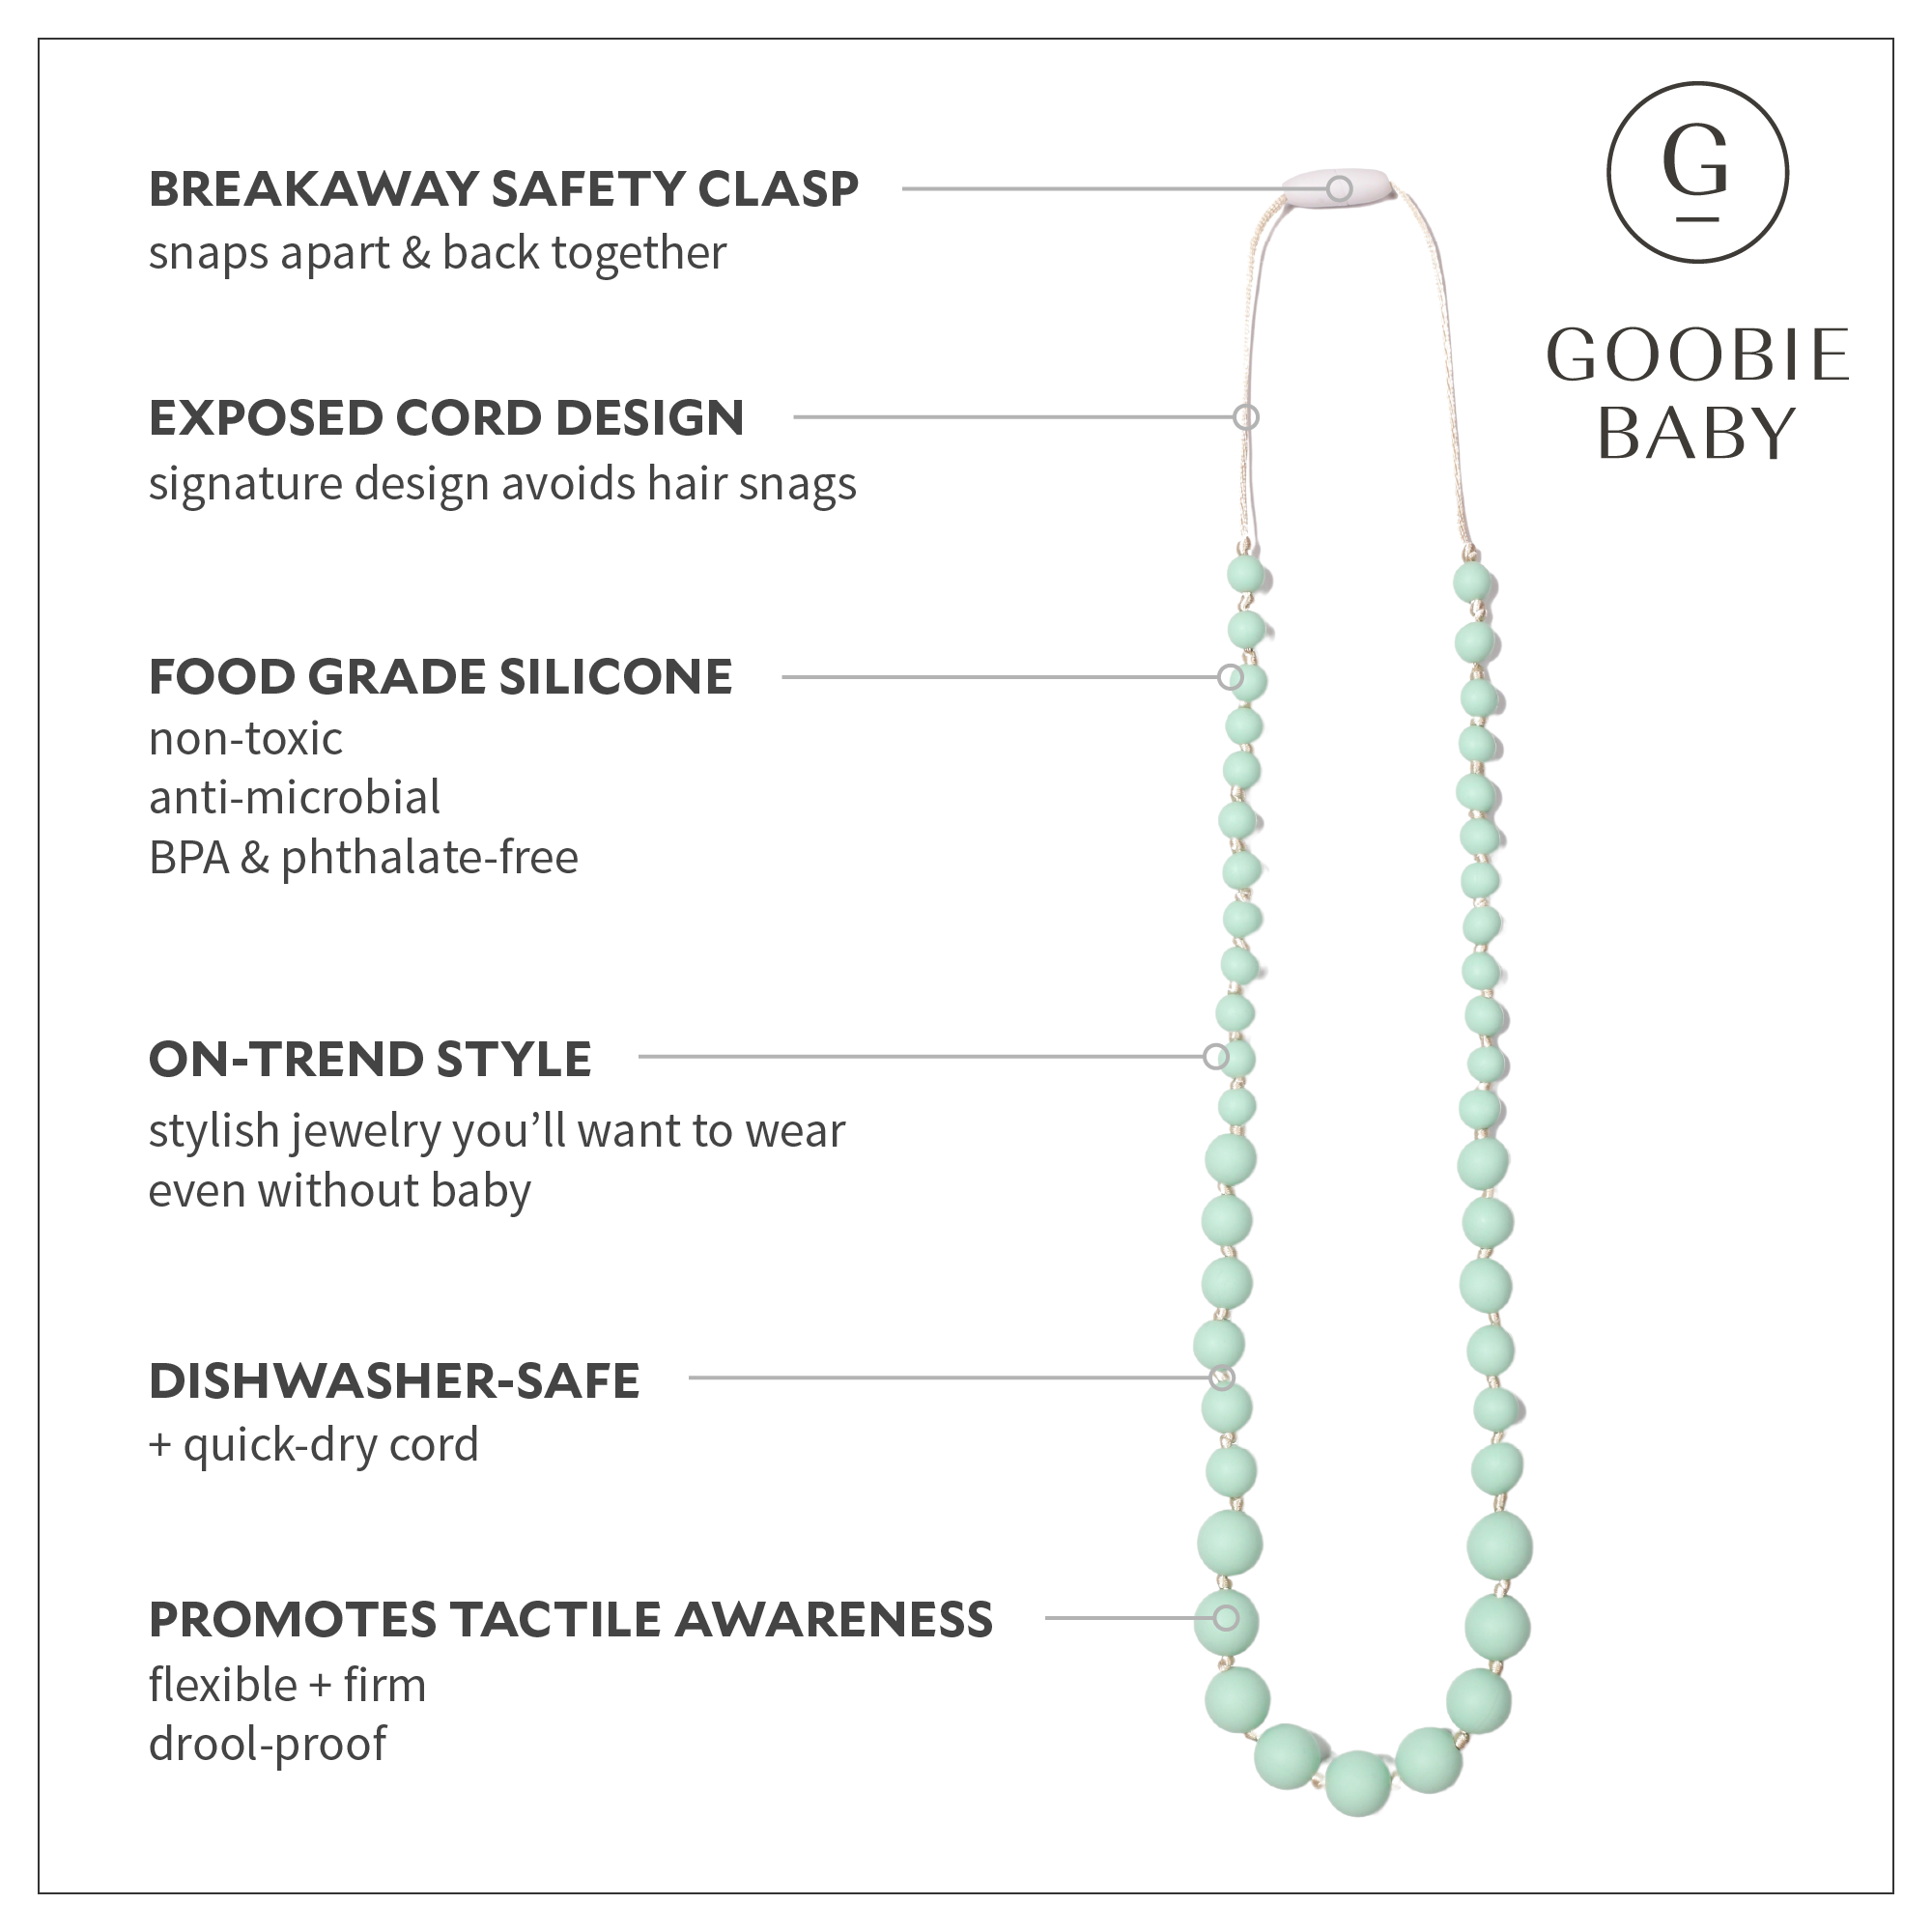 Audrey Teething Necklace - Mint